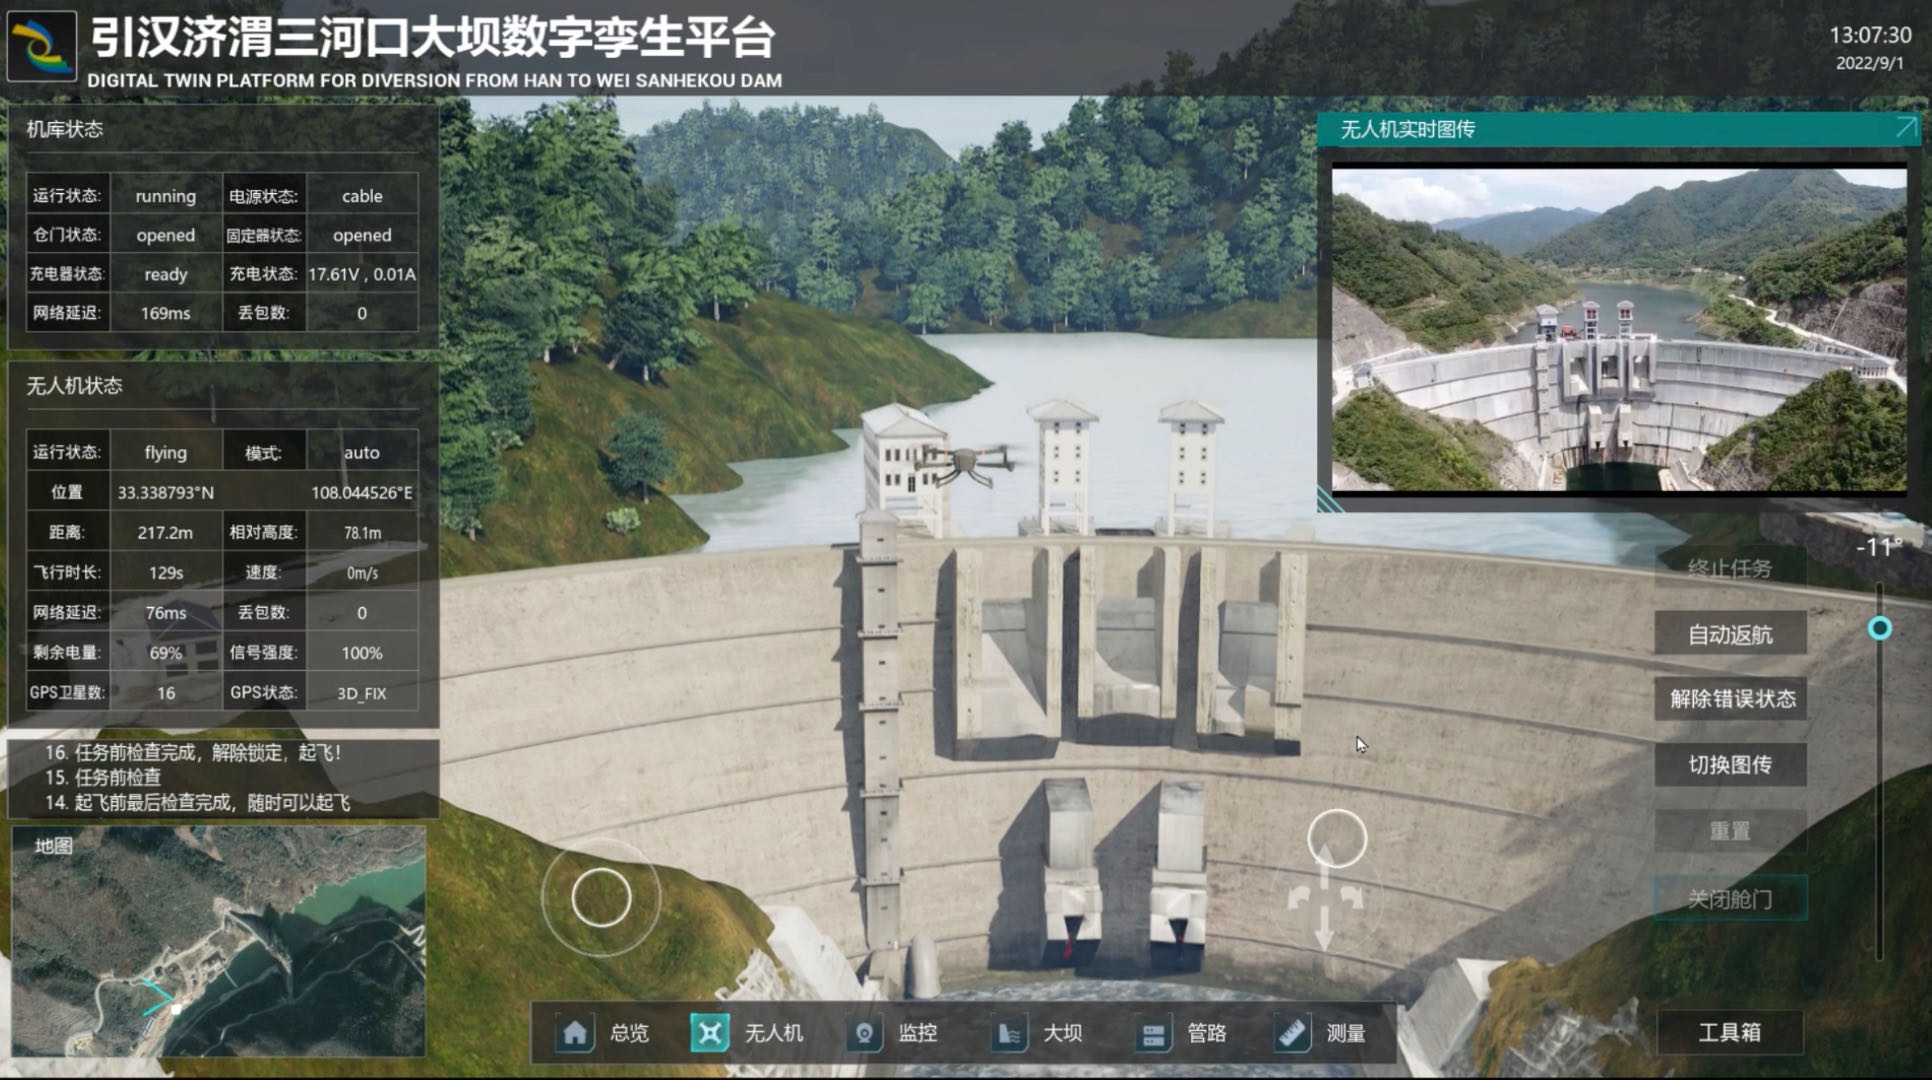  Digital twin platform of Sanhekou Dam from Han River to Wei River. The interviewees are provided with pictures.